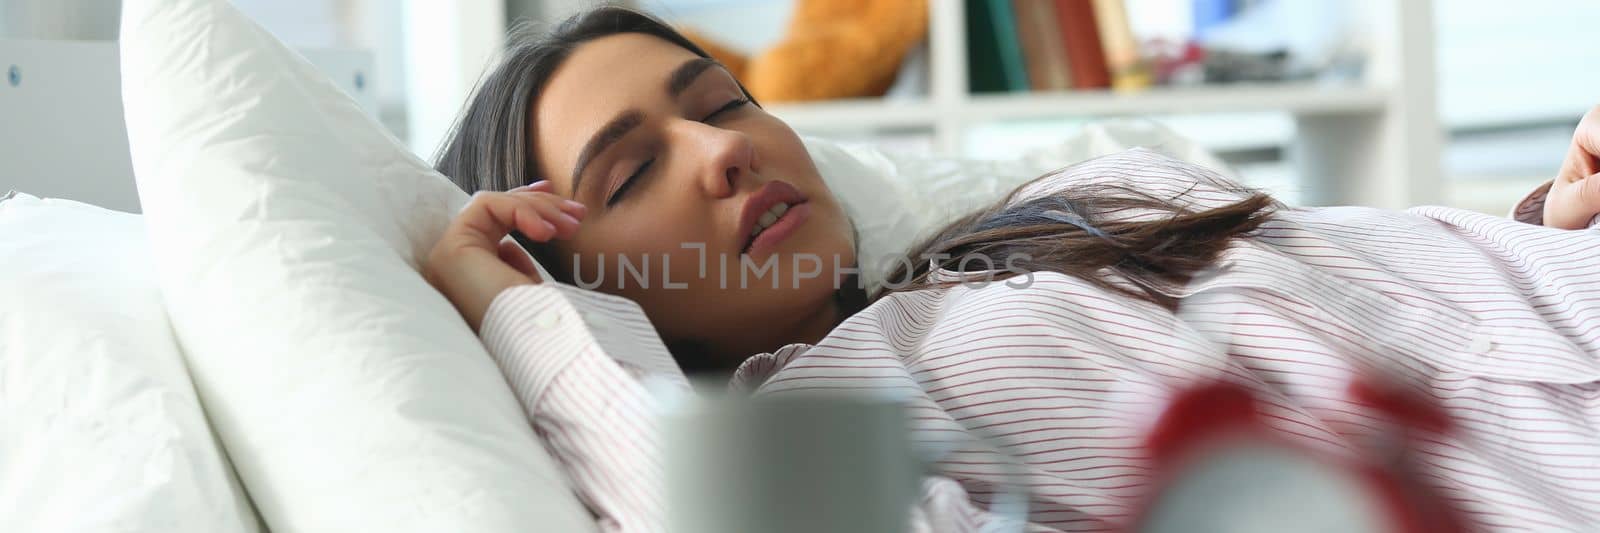 Closeup of red alarm clock and calm peaceful young woman sleeping on bed in background. Morning serene dream concept